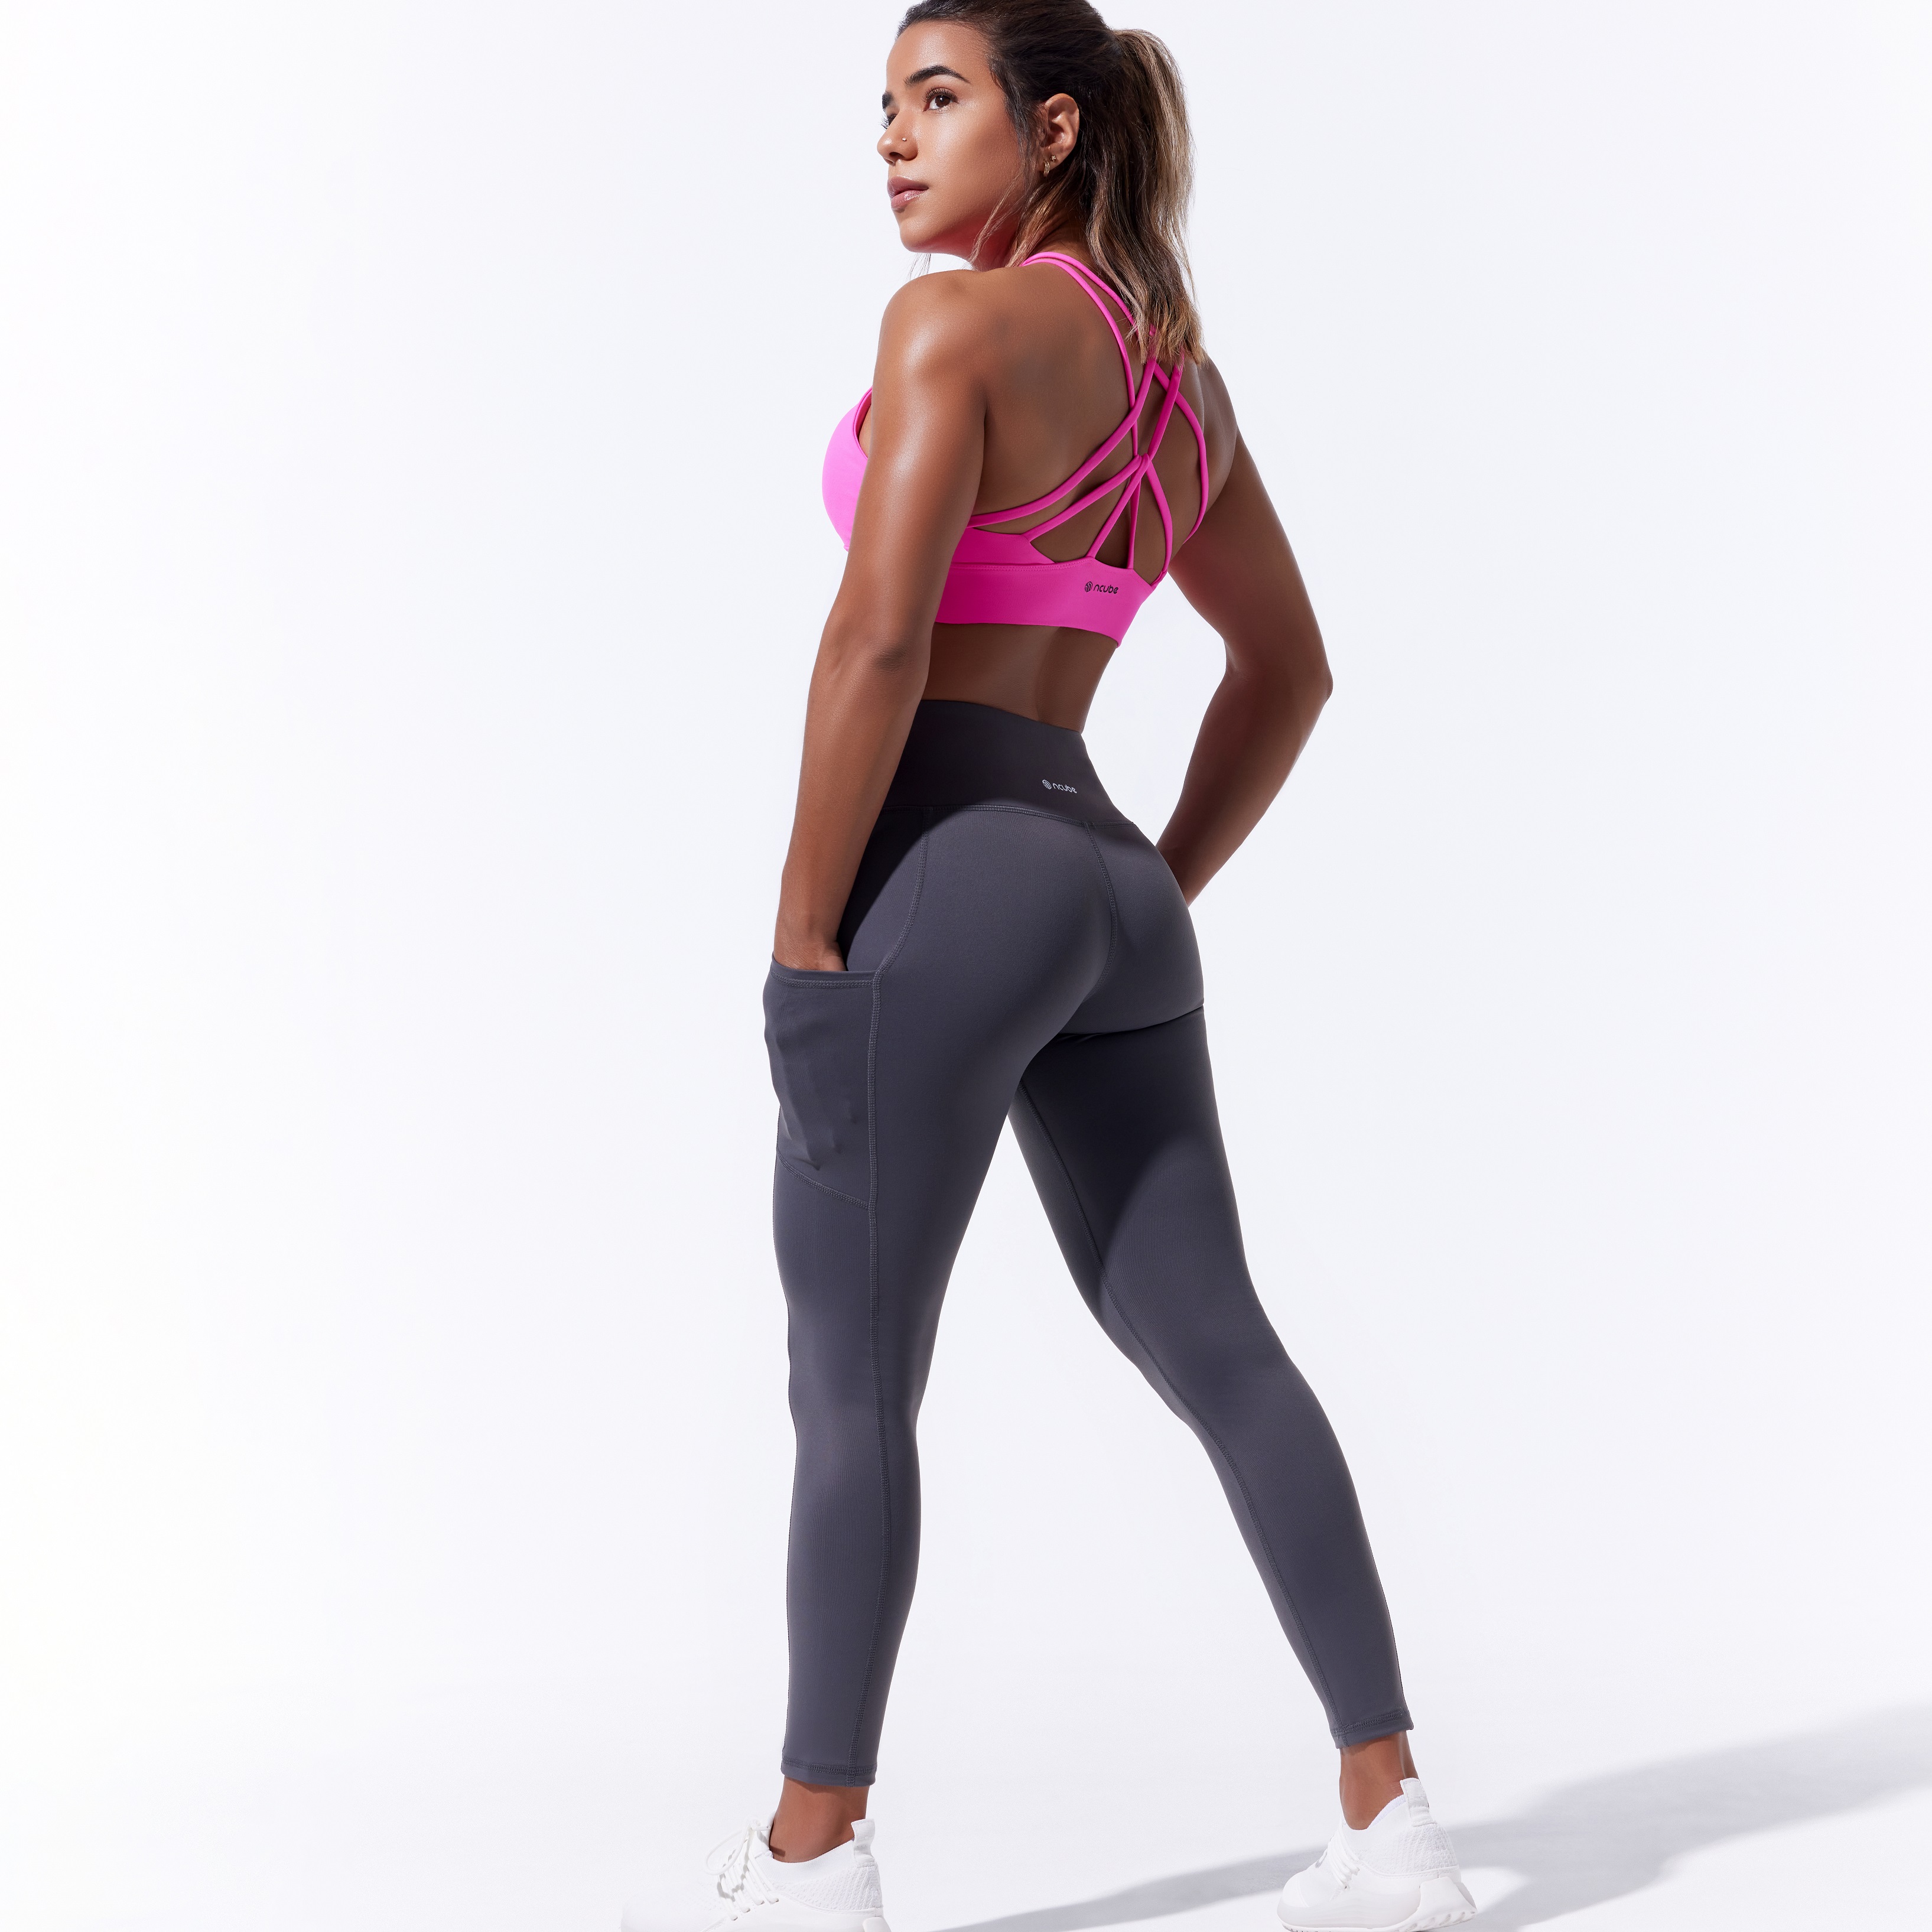 Women's Tights and Leggings